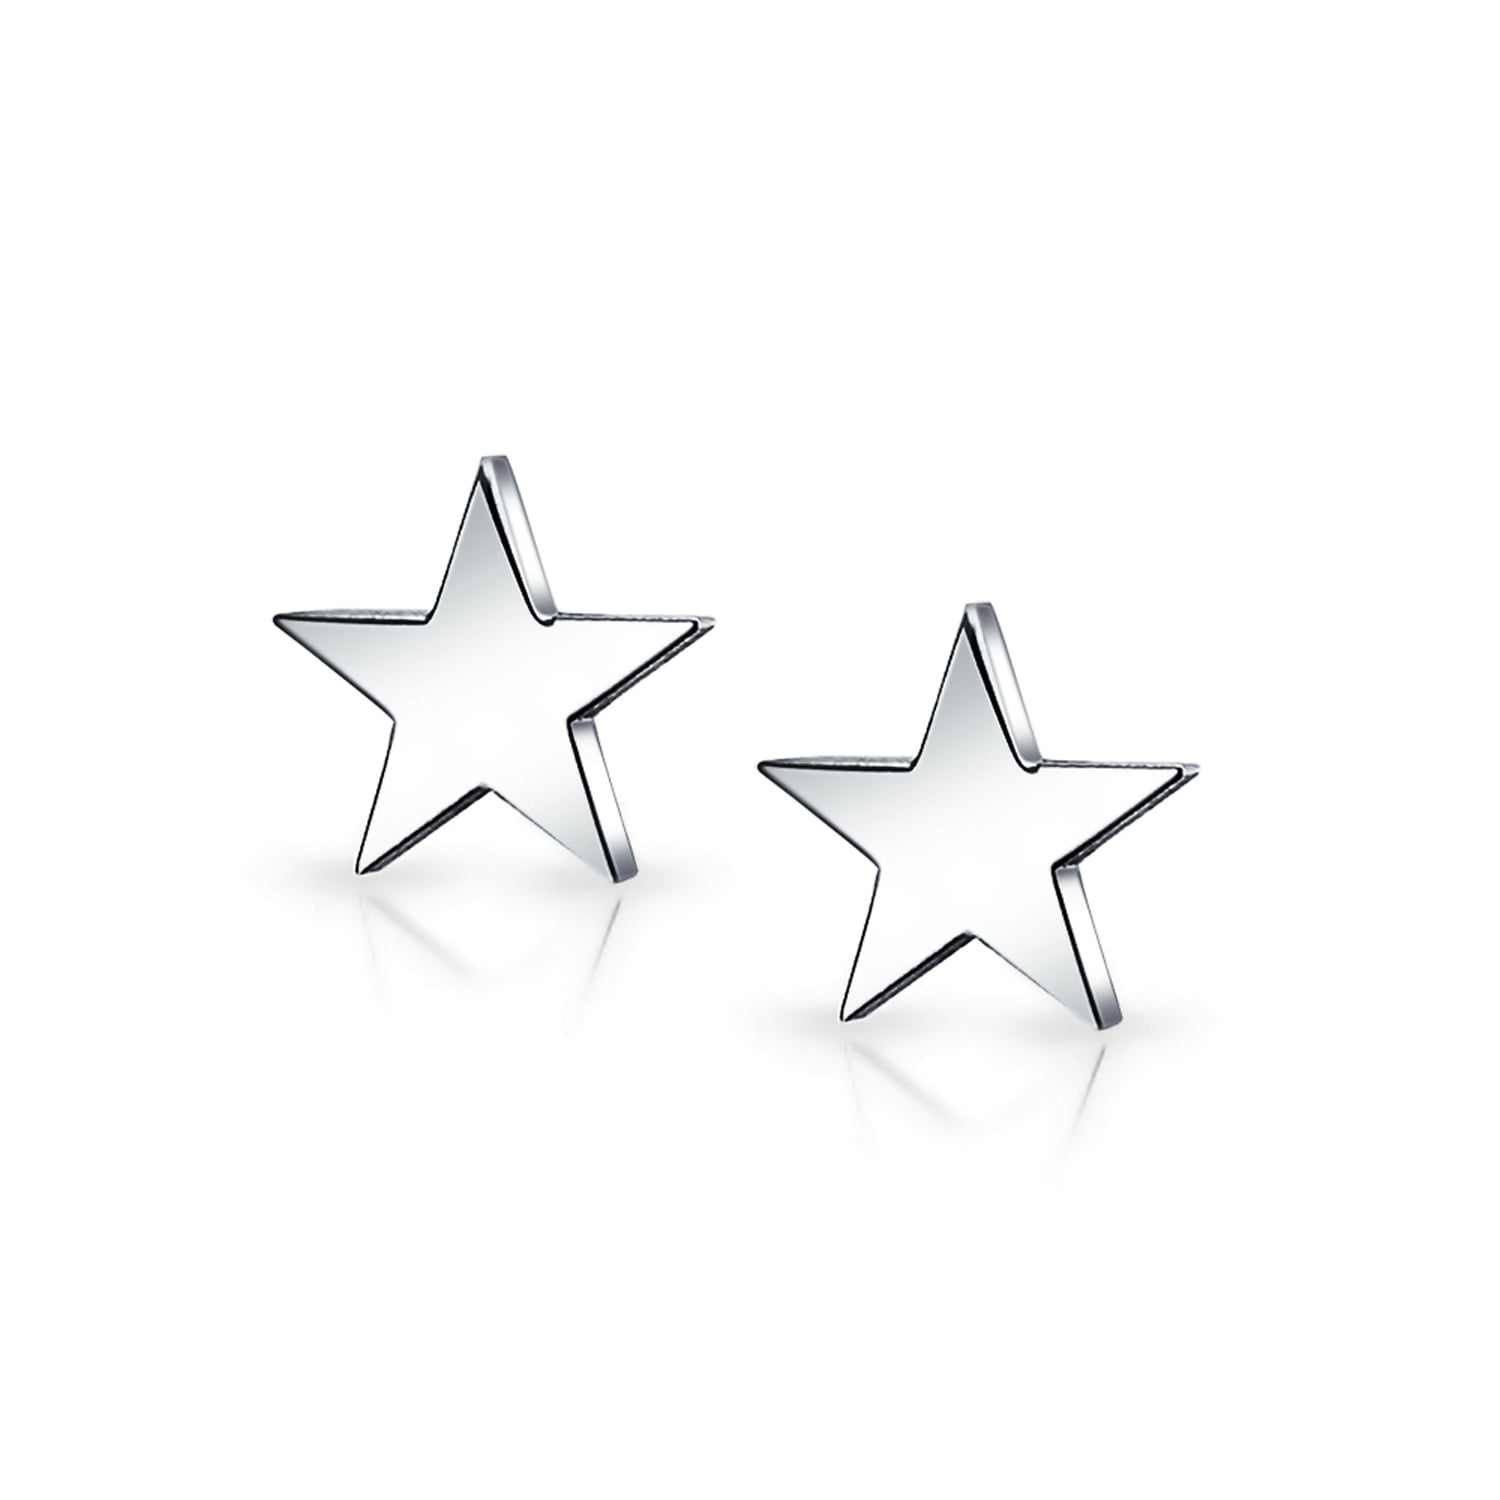 Personalize Simple Patriotic Celestial Star Stud Earrings For Men And Women Black Polished Finish Stainless Steel 10MM